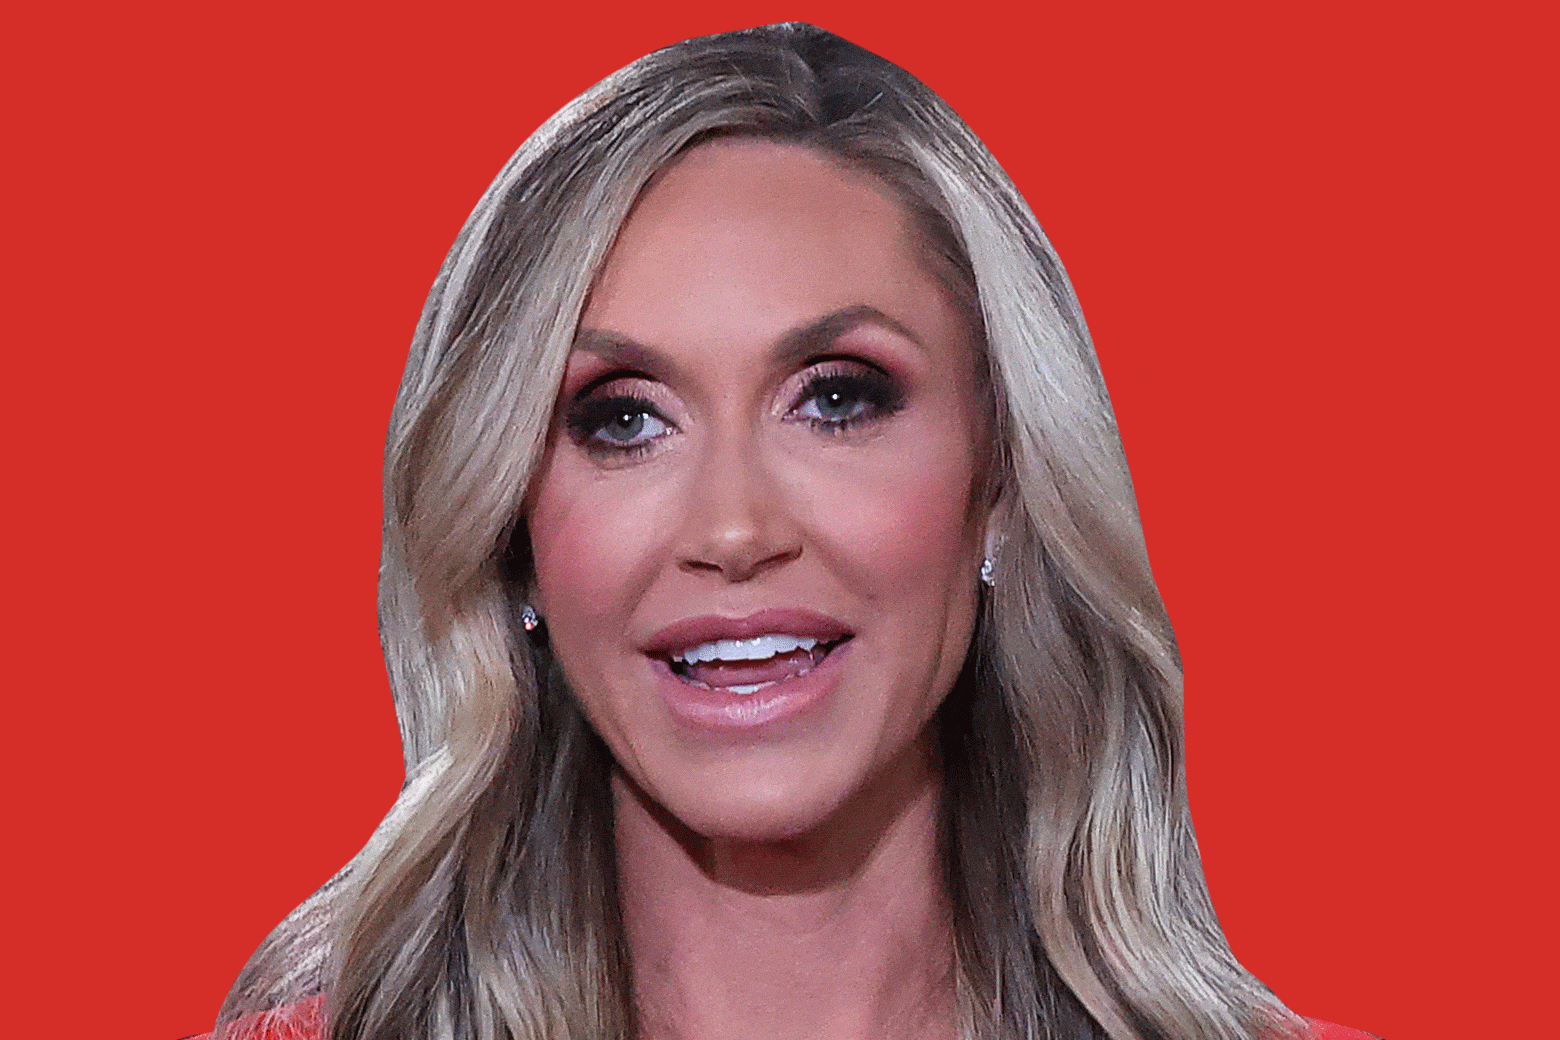 Lara Trump's face is seen in front of a red background that changes to blue.